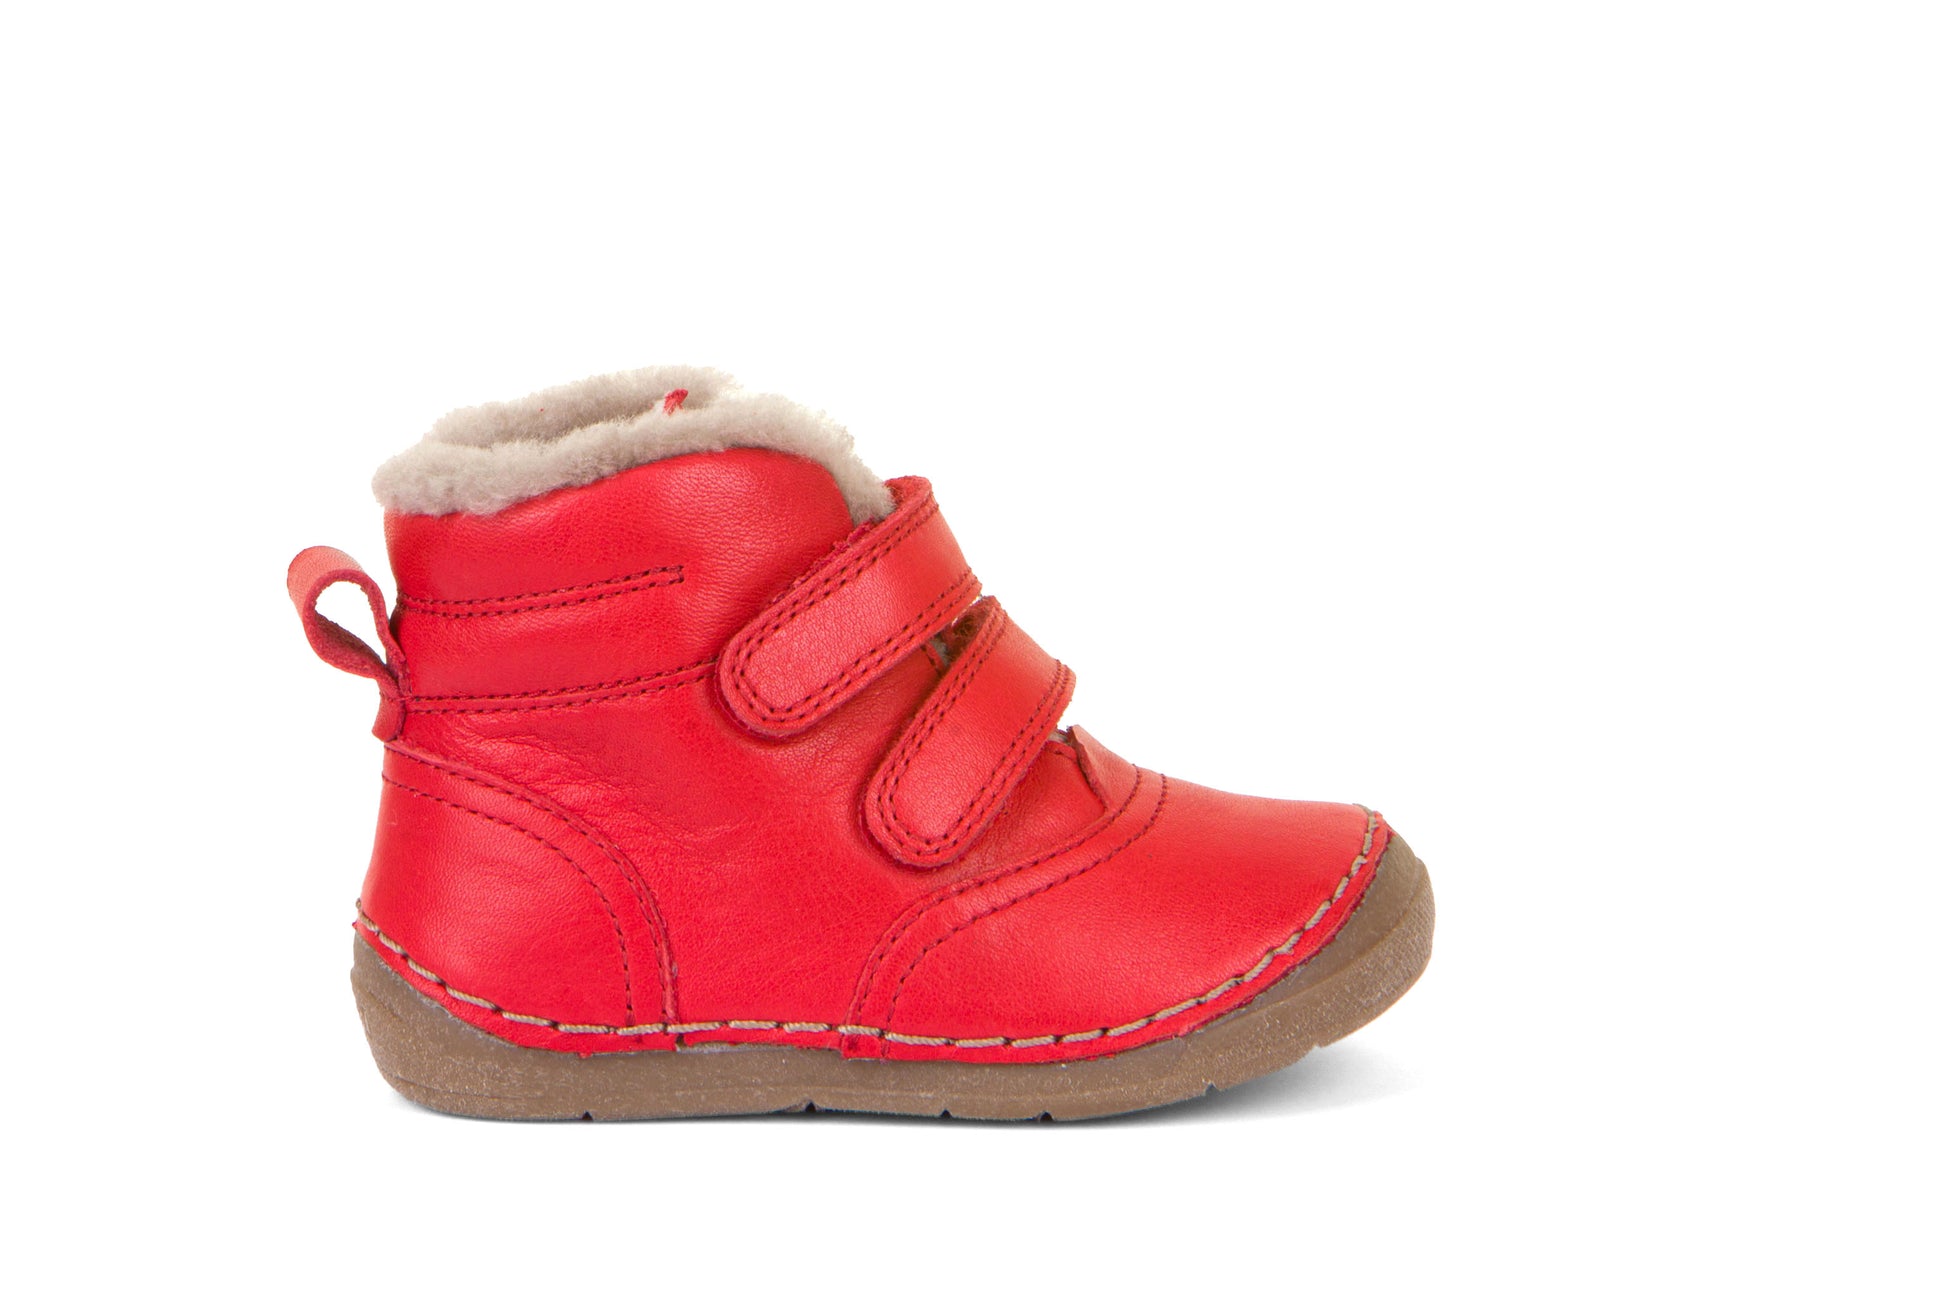 A unisex sheepskin lined boot by Froddo, style Paix Winter G2110113-11 in Red. Right side view.